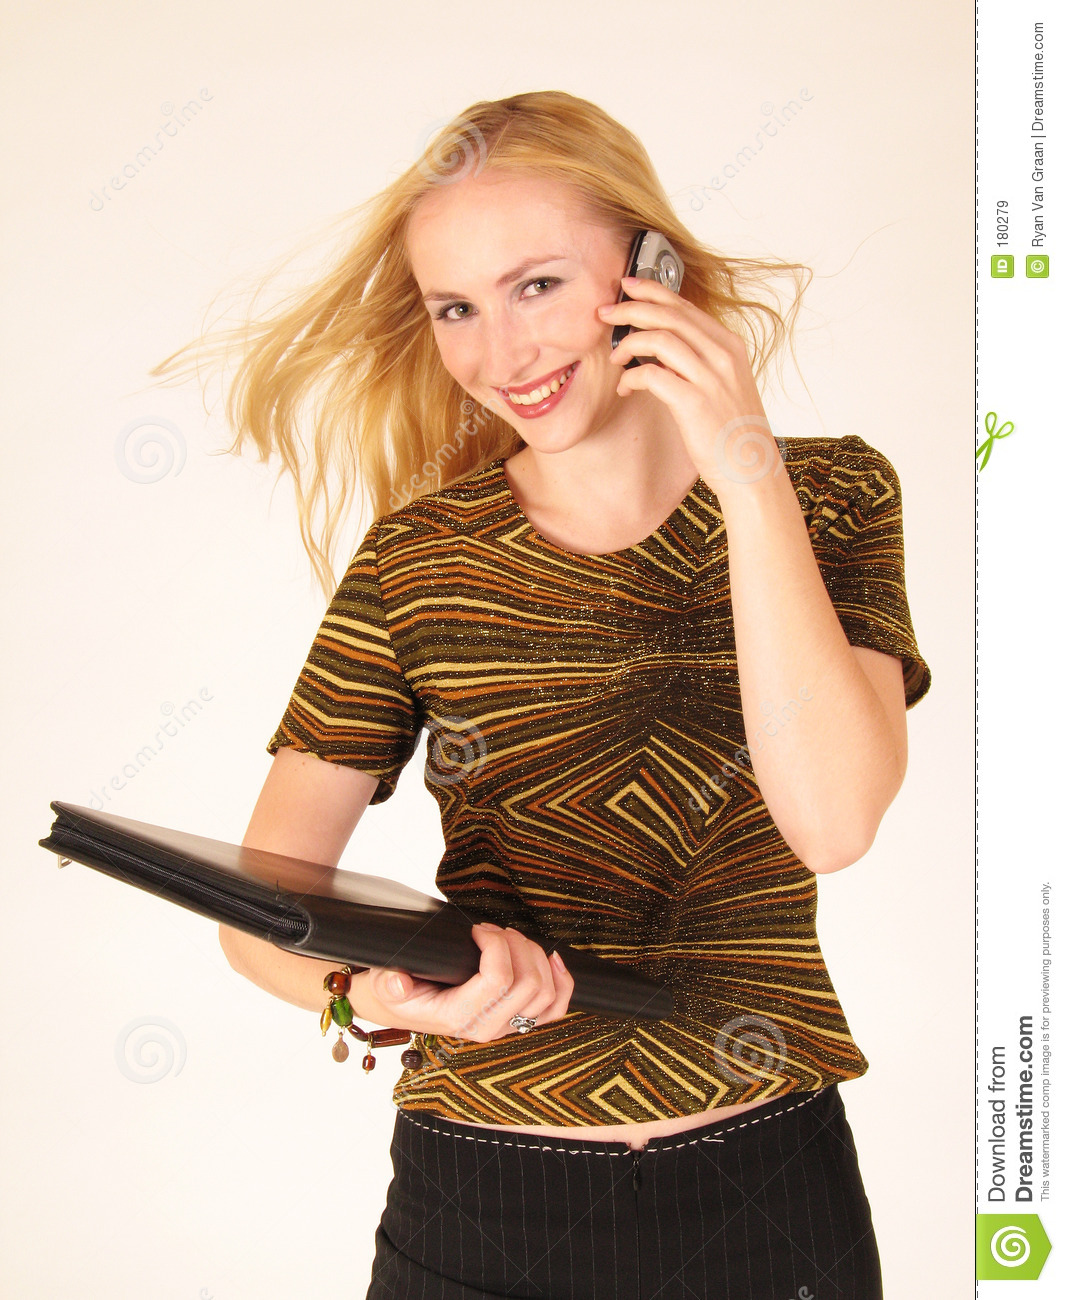 Young Lady Holding A Cell Phone Royalty Free Stock Images   Image